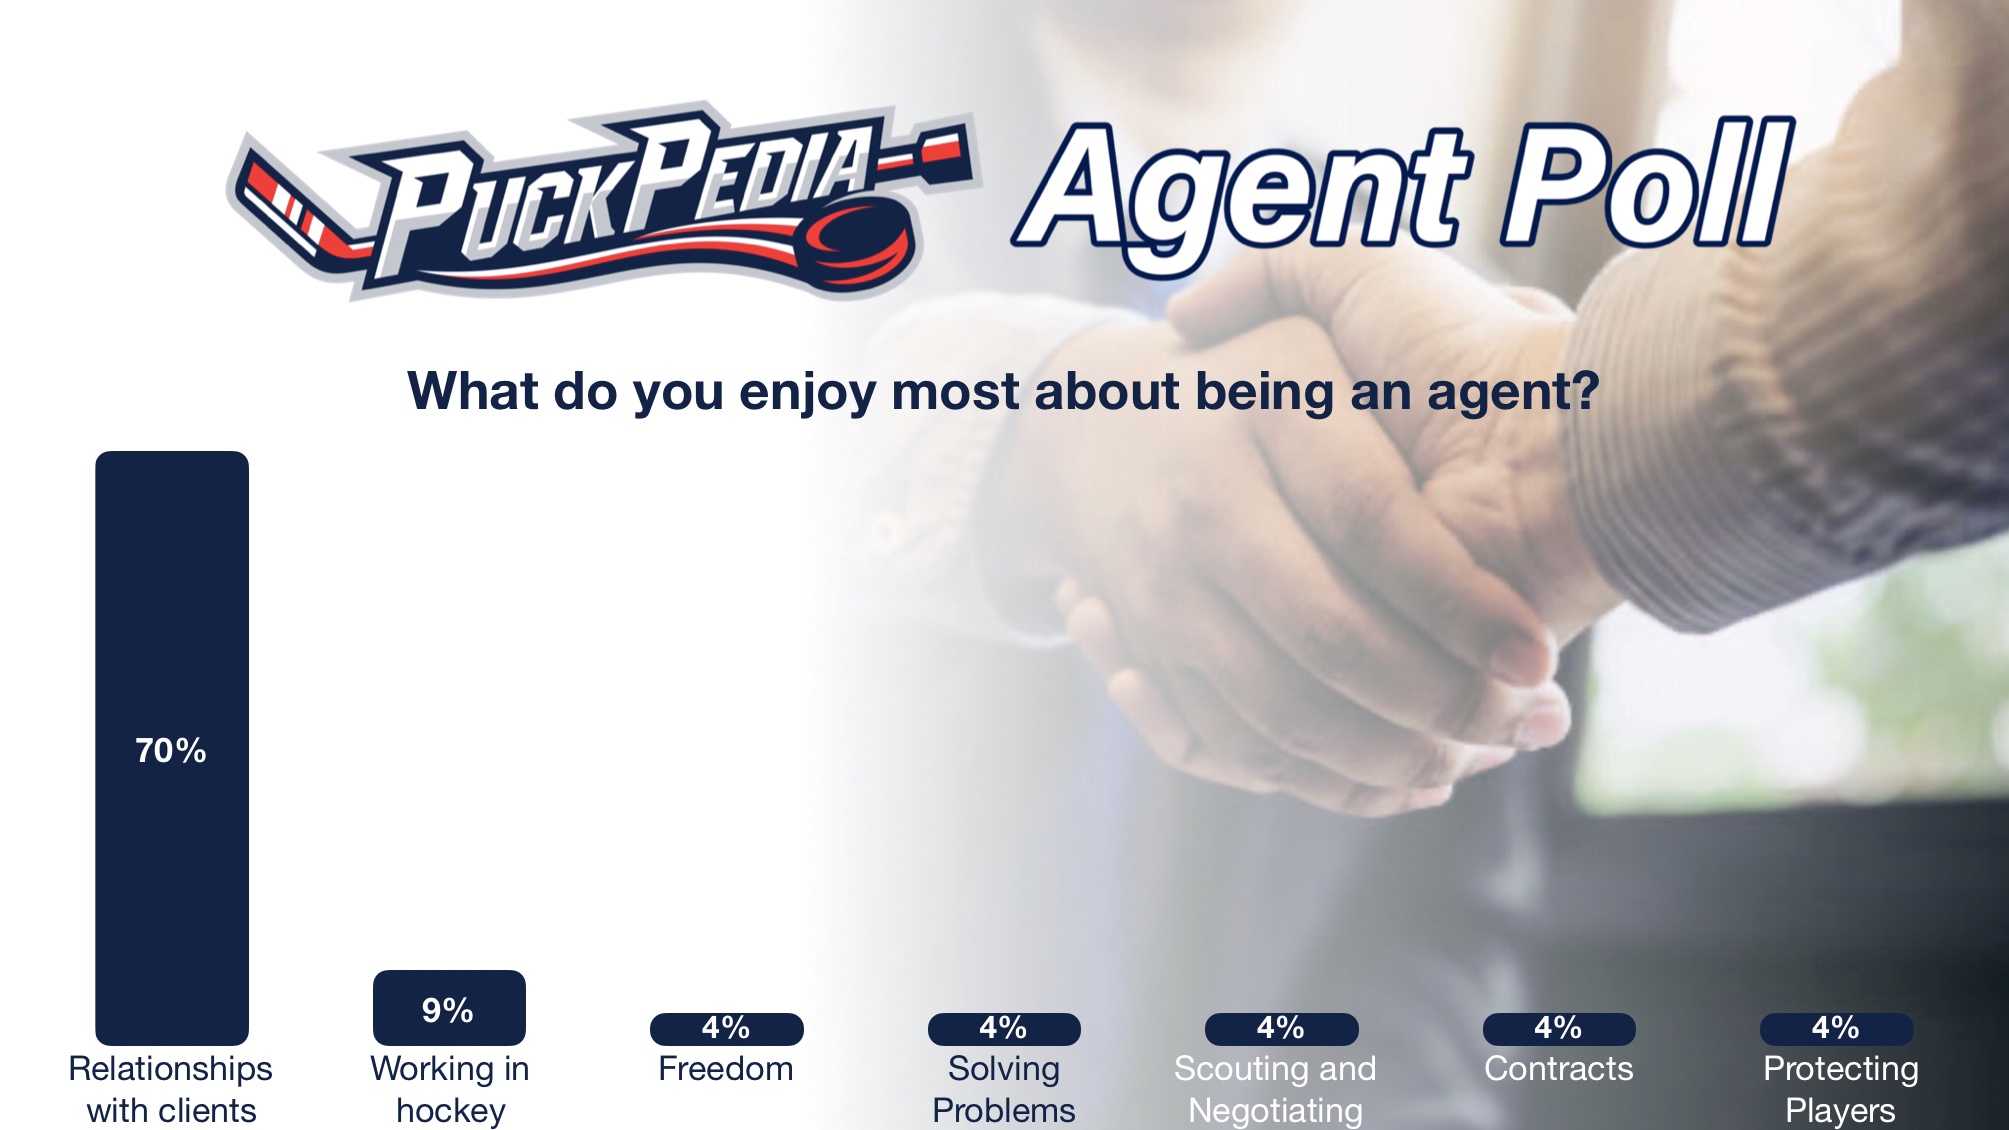 What do you enjoy most about being an agent?